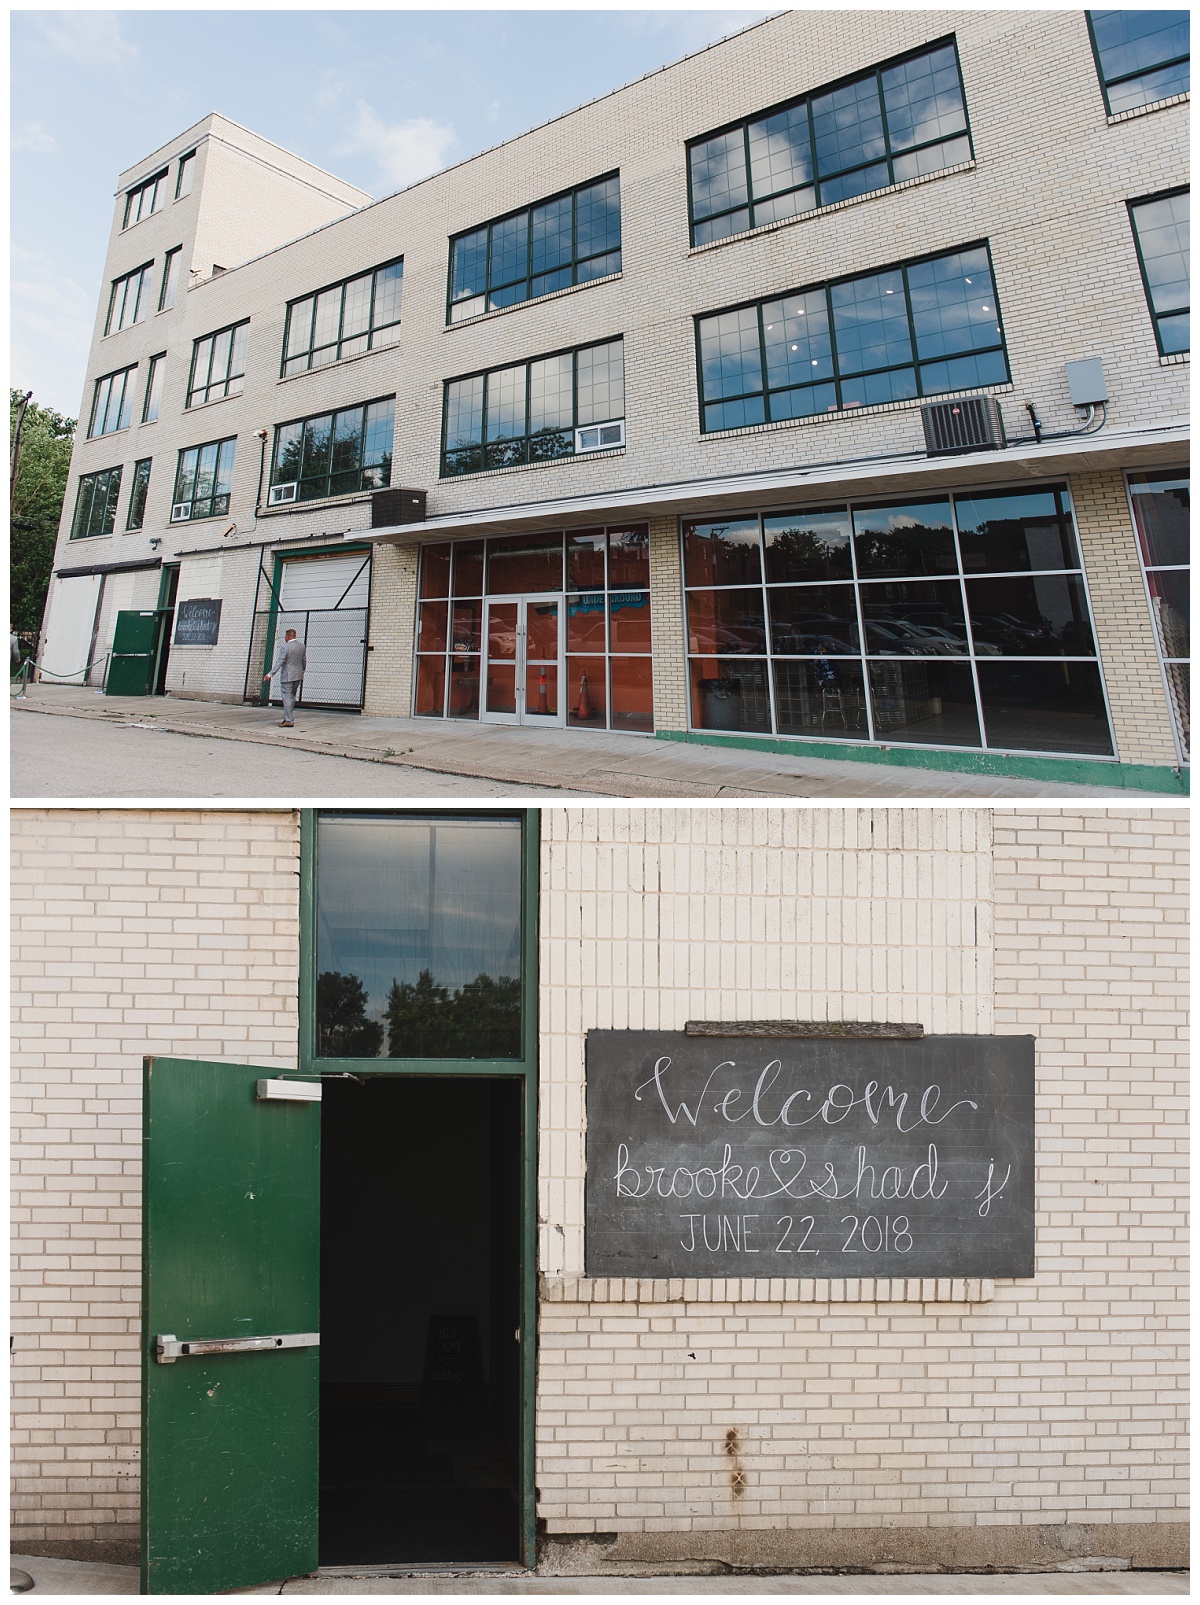 Three story industrial buidling - the street view of Jefferson Underground, a St. Louis wedding venue | Green steel door on white brick building, next to large chalkboard which reads, "Welcome... brook & shad j. JUNE 22, 2018"